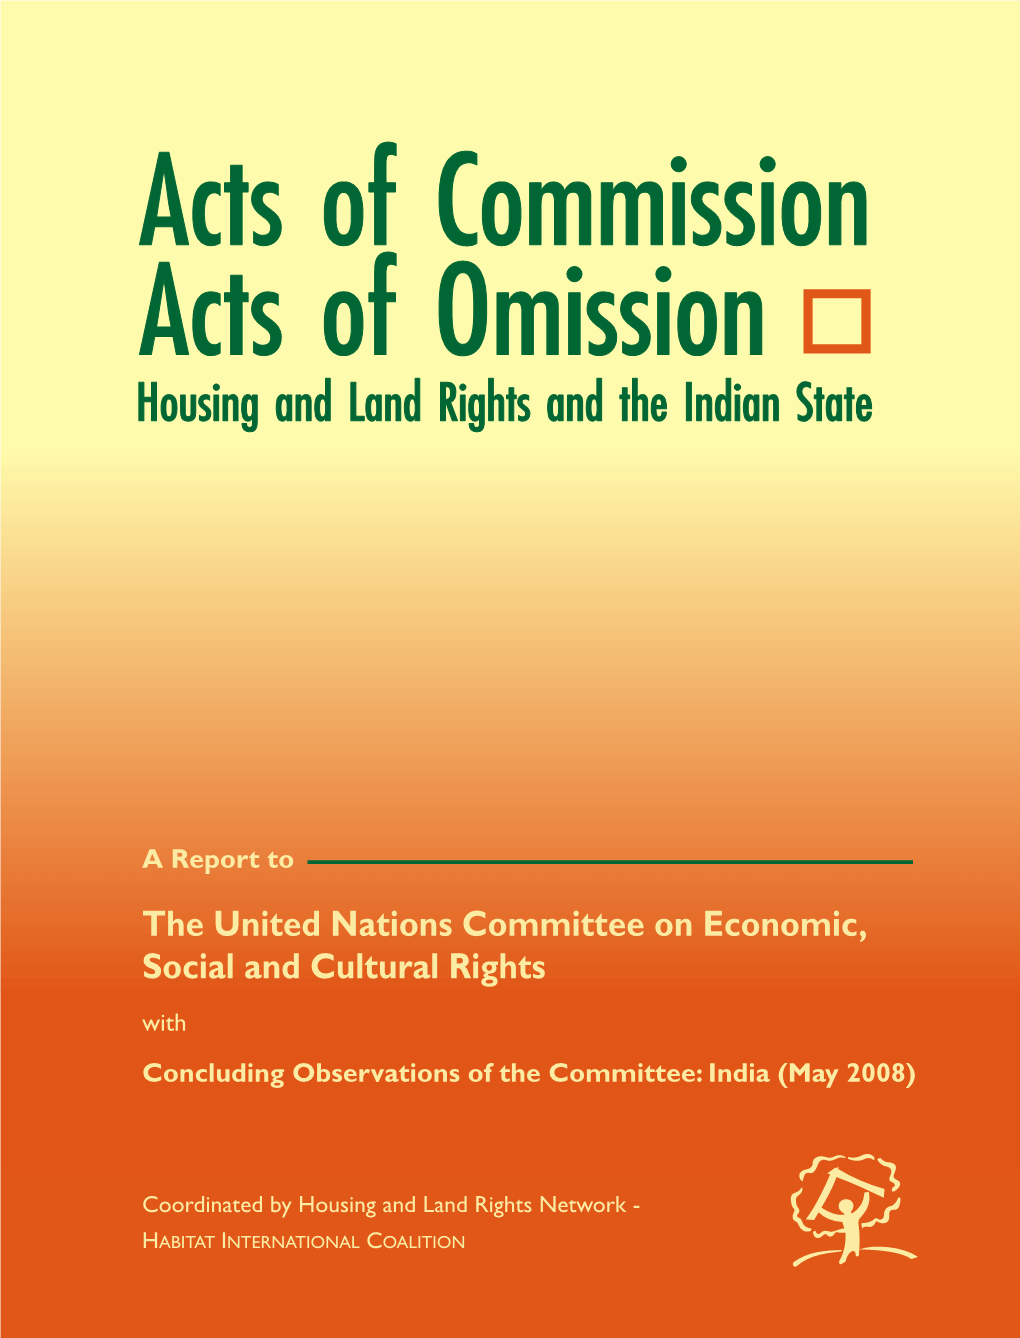 Acts of Commission, Acts of Omission: Housing and Land Rights and the Indian State” 2004, Is Available Online At